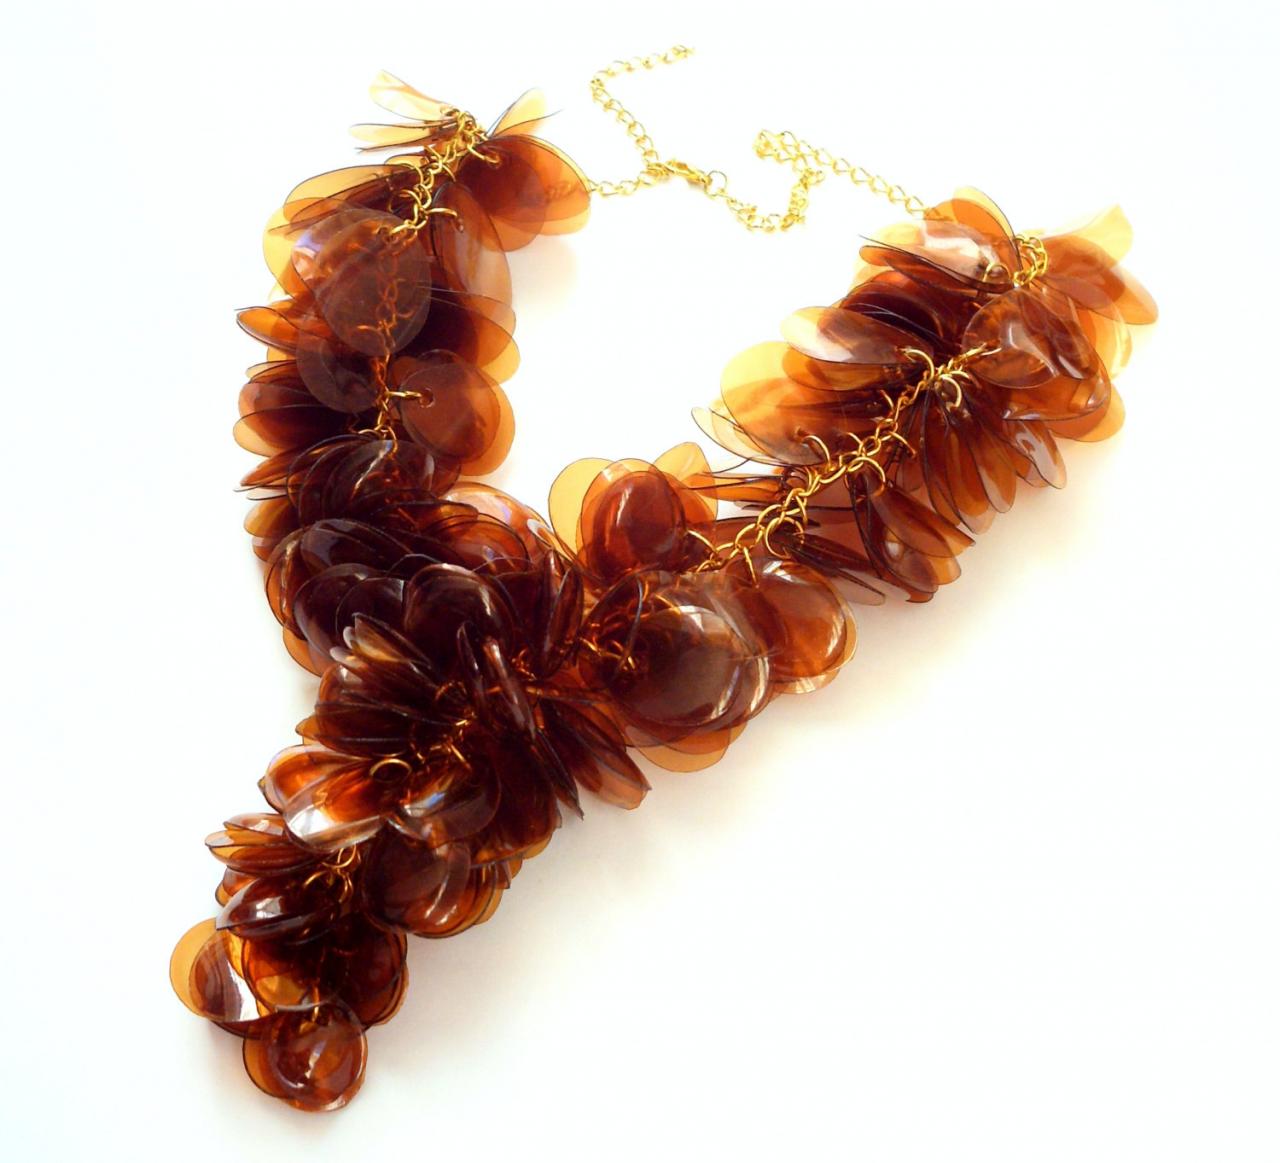 Brown Necklace Made Of Plastic Bottles Statement Necklace Upcycled Jewellery Chunky Necklace Handmade Artisan Jewelry